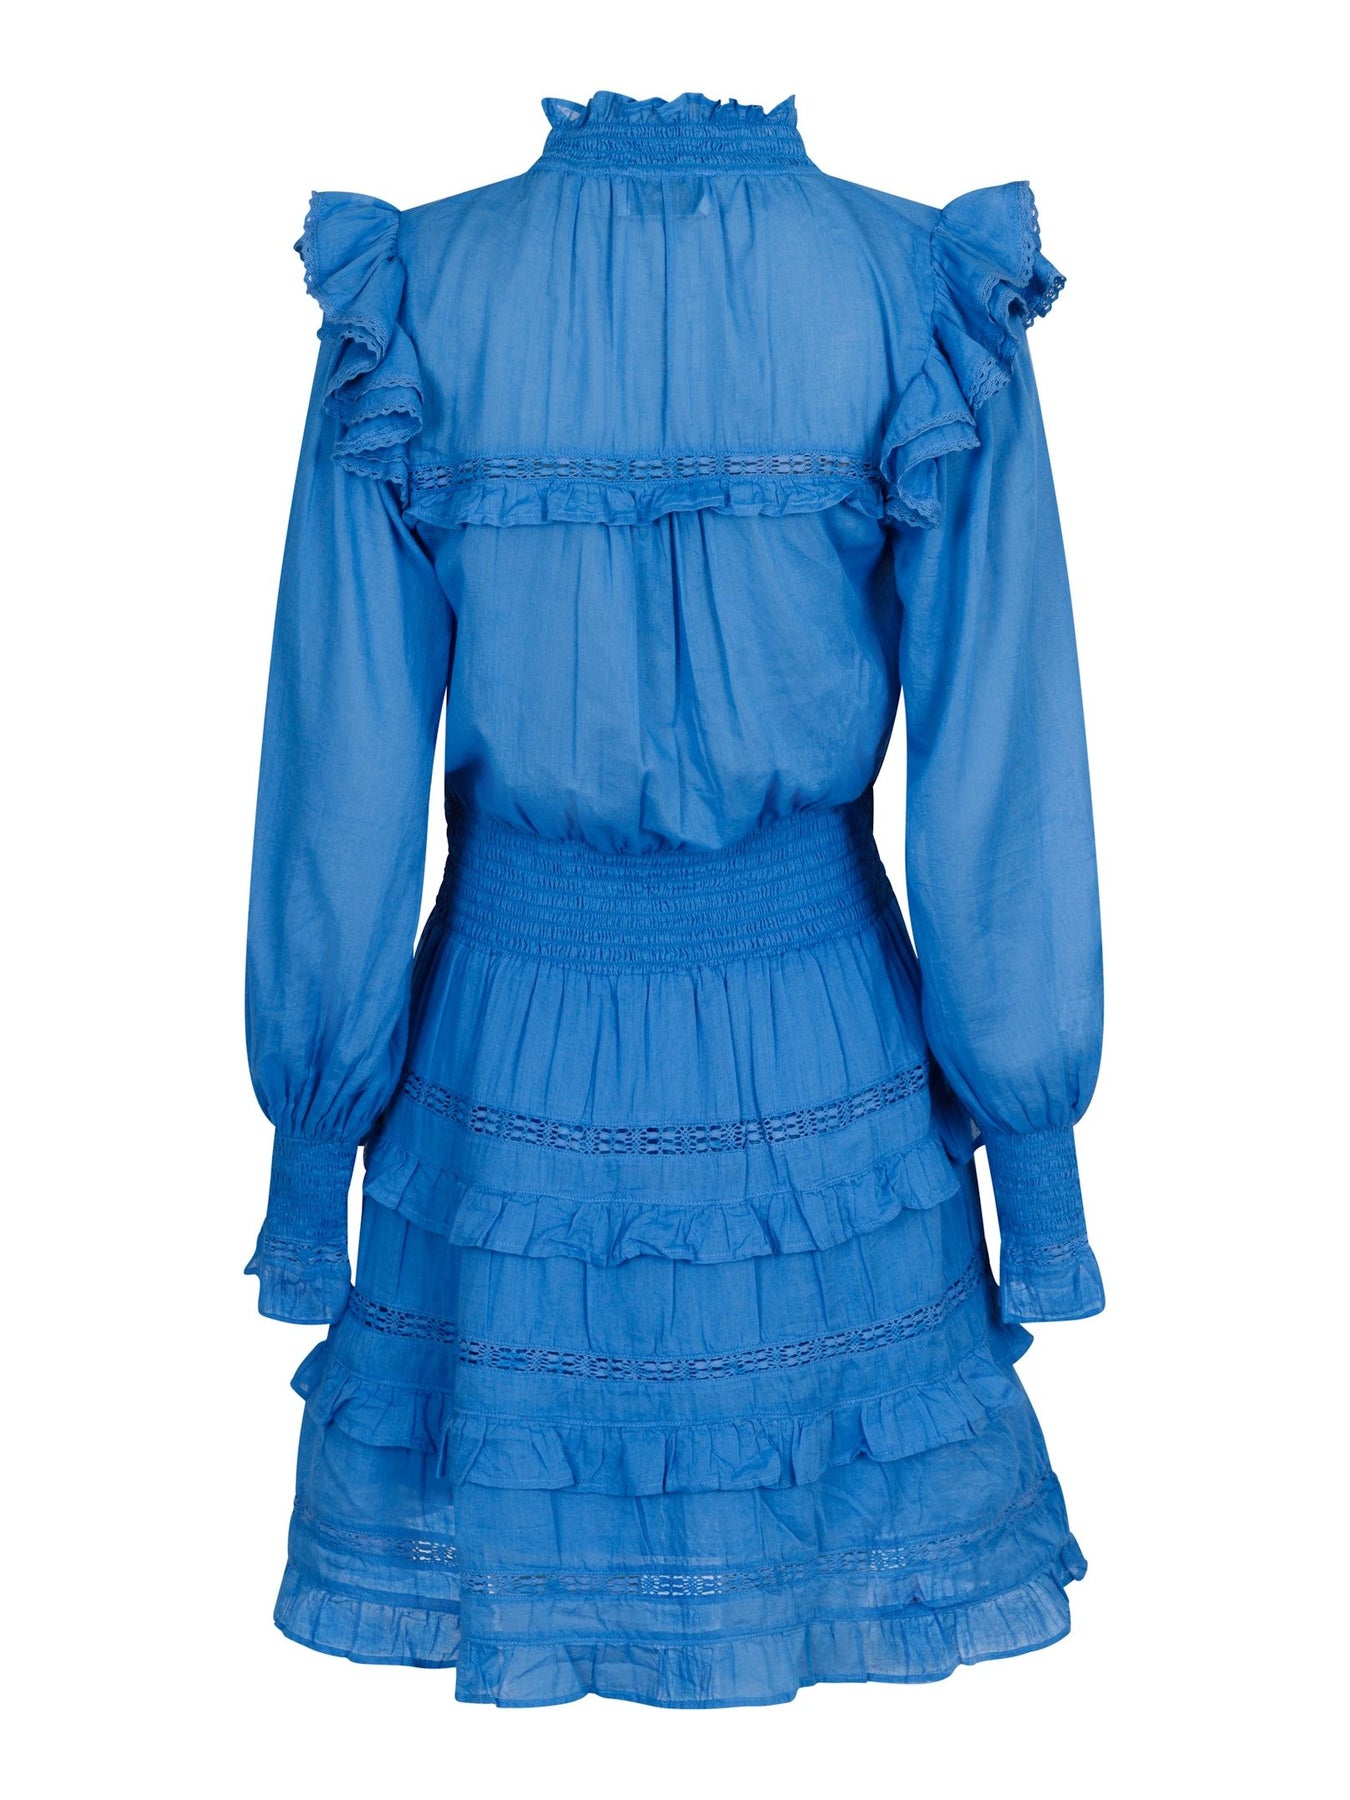 Piano S Voile Dress - Blue